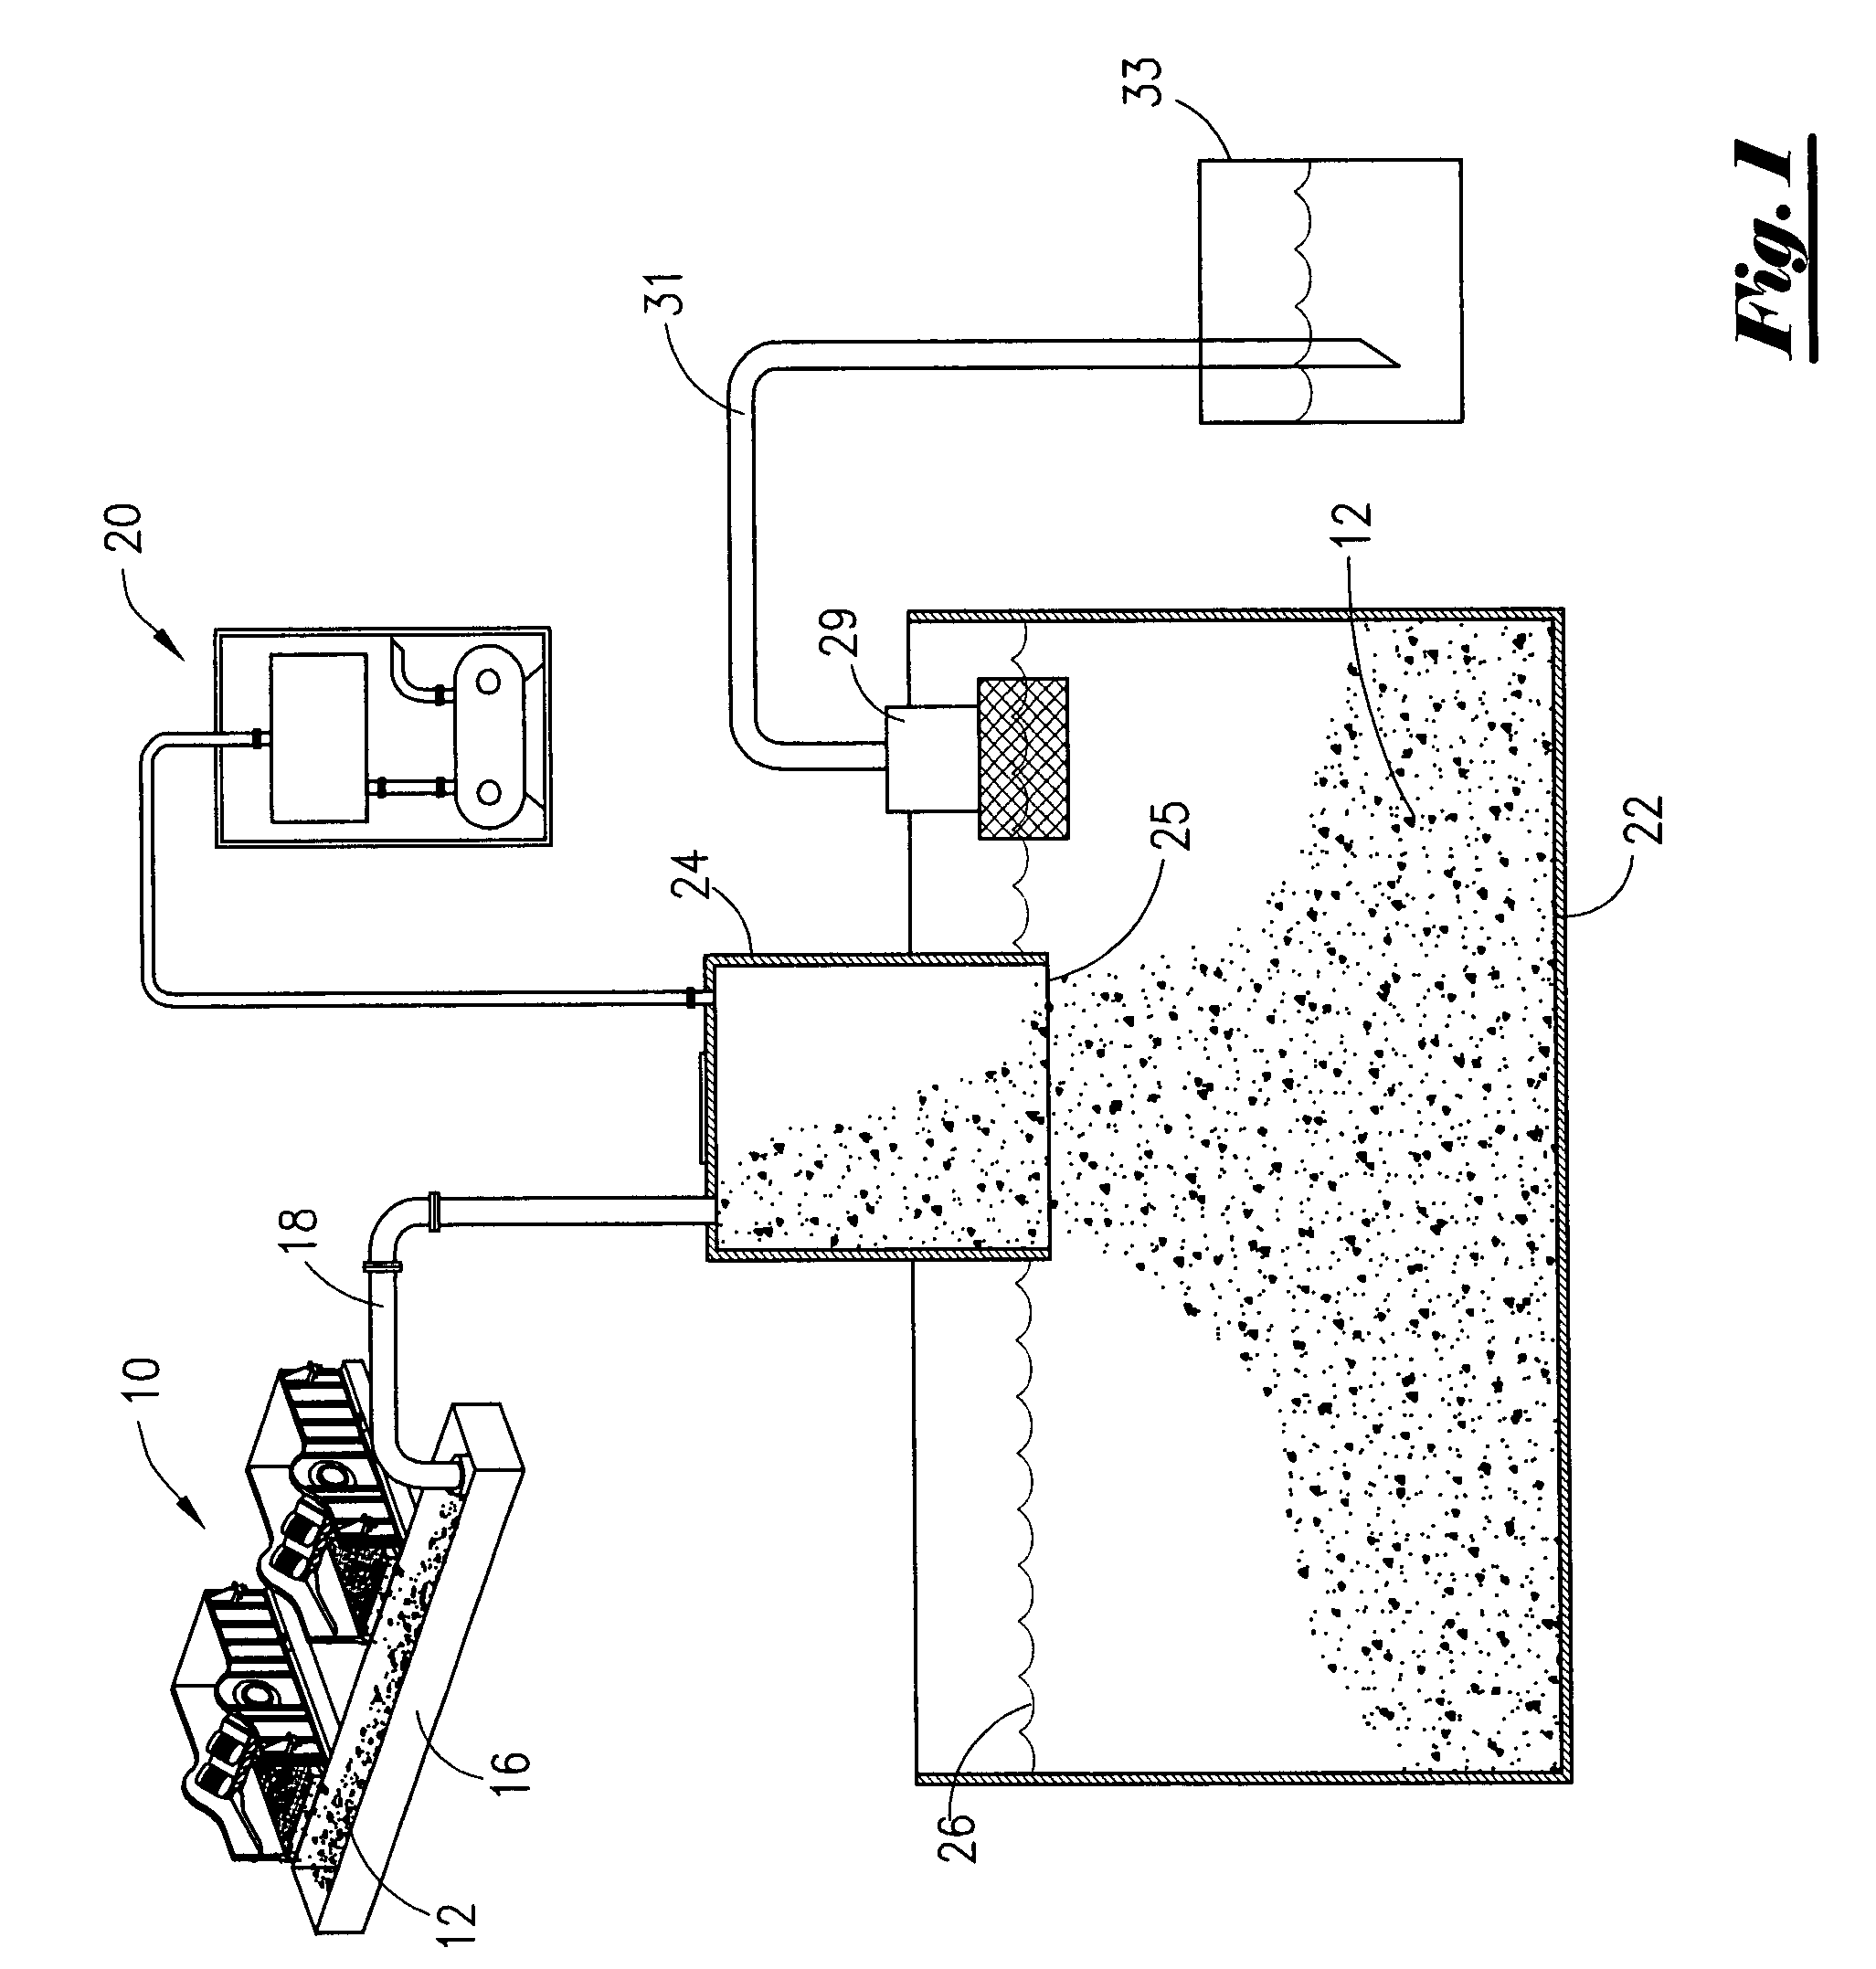 Method and apparatus for vacuum collecting and gravity depositing drill cuttings